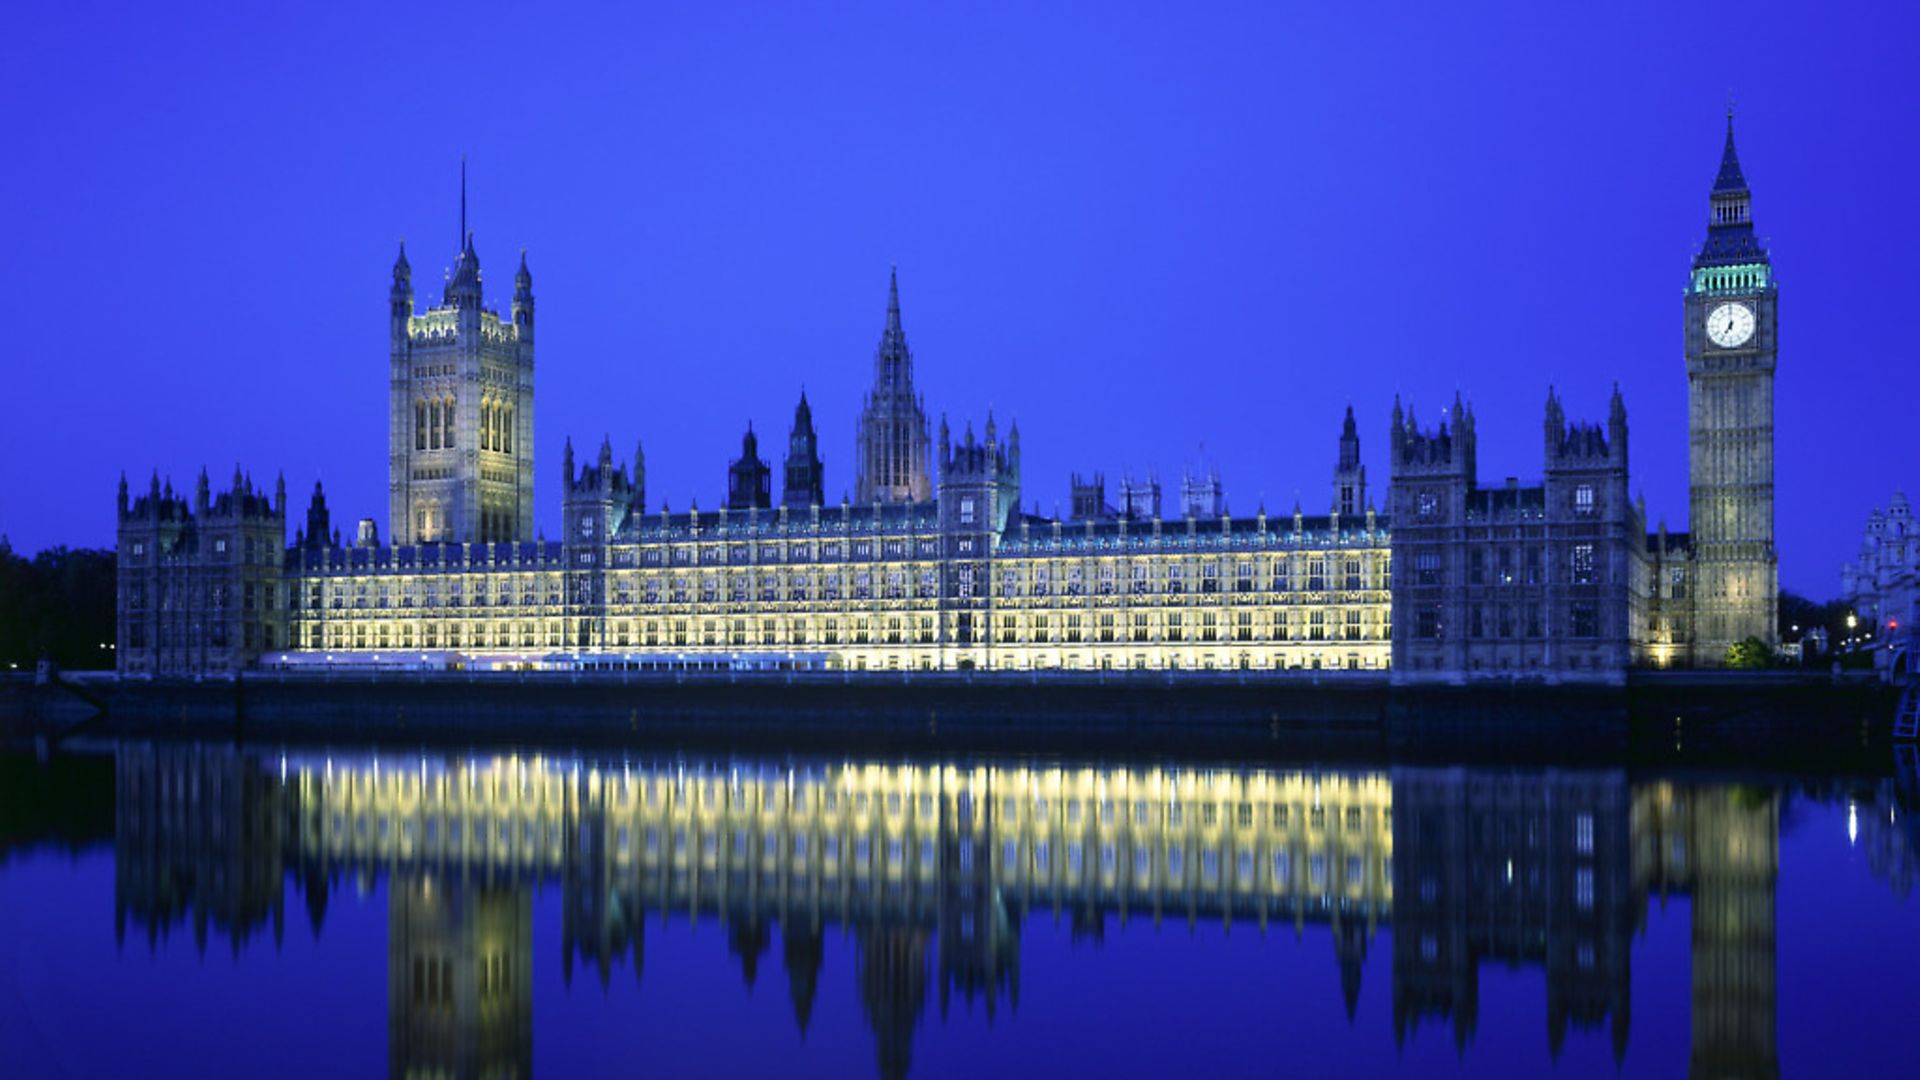 The Houses of Parliament. (Photo by English Heritage/Heritage Images/Getty Images) - Credit: Getty Images